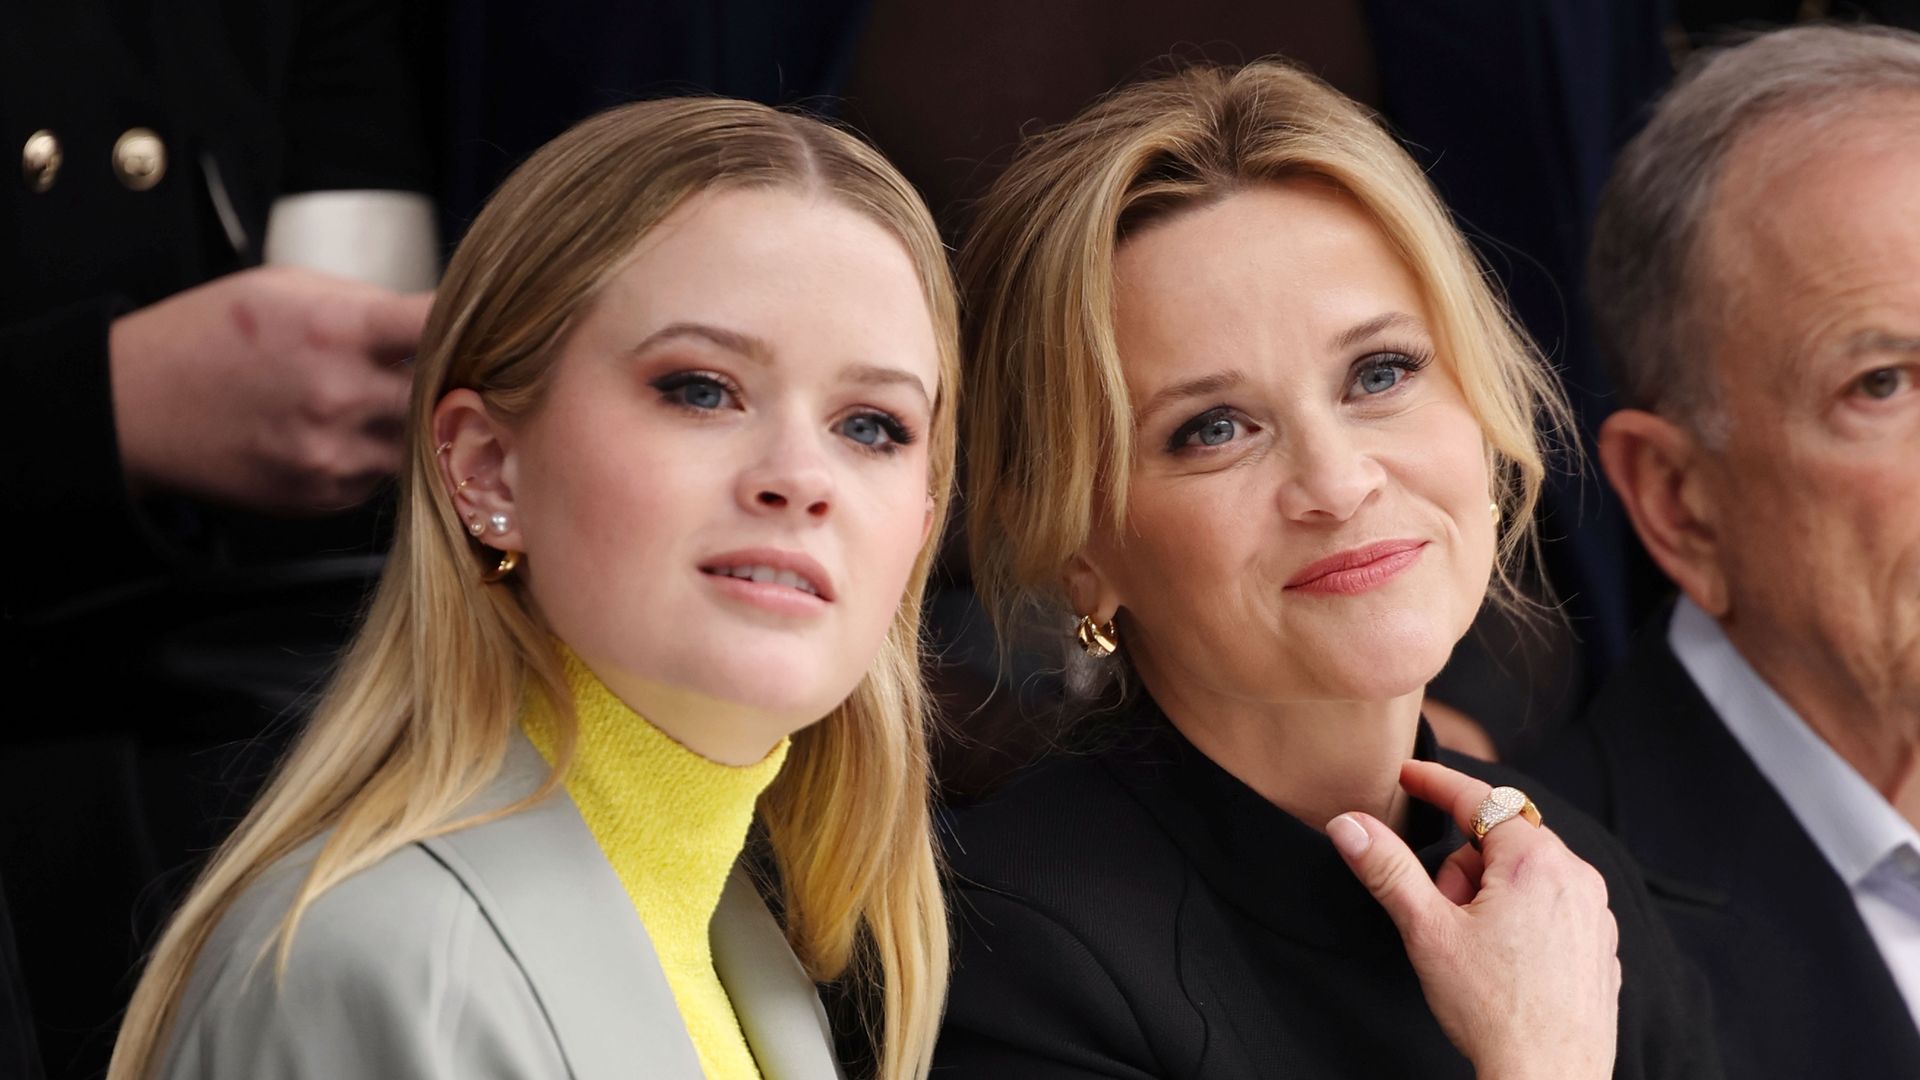  Ava Elizabeth Phillippe and Reese Witherspoon watch show 